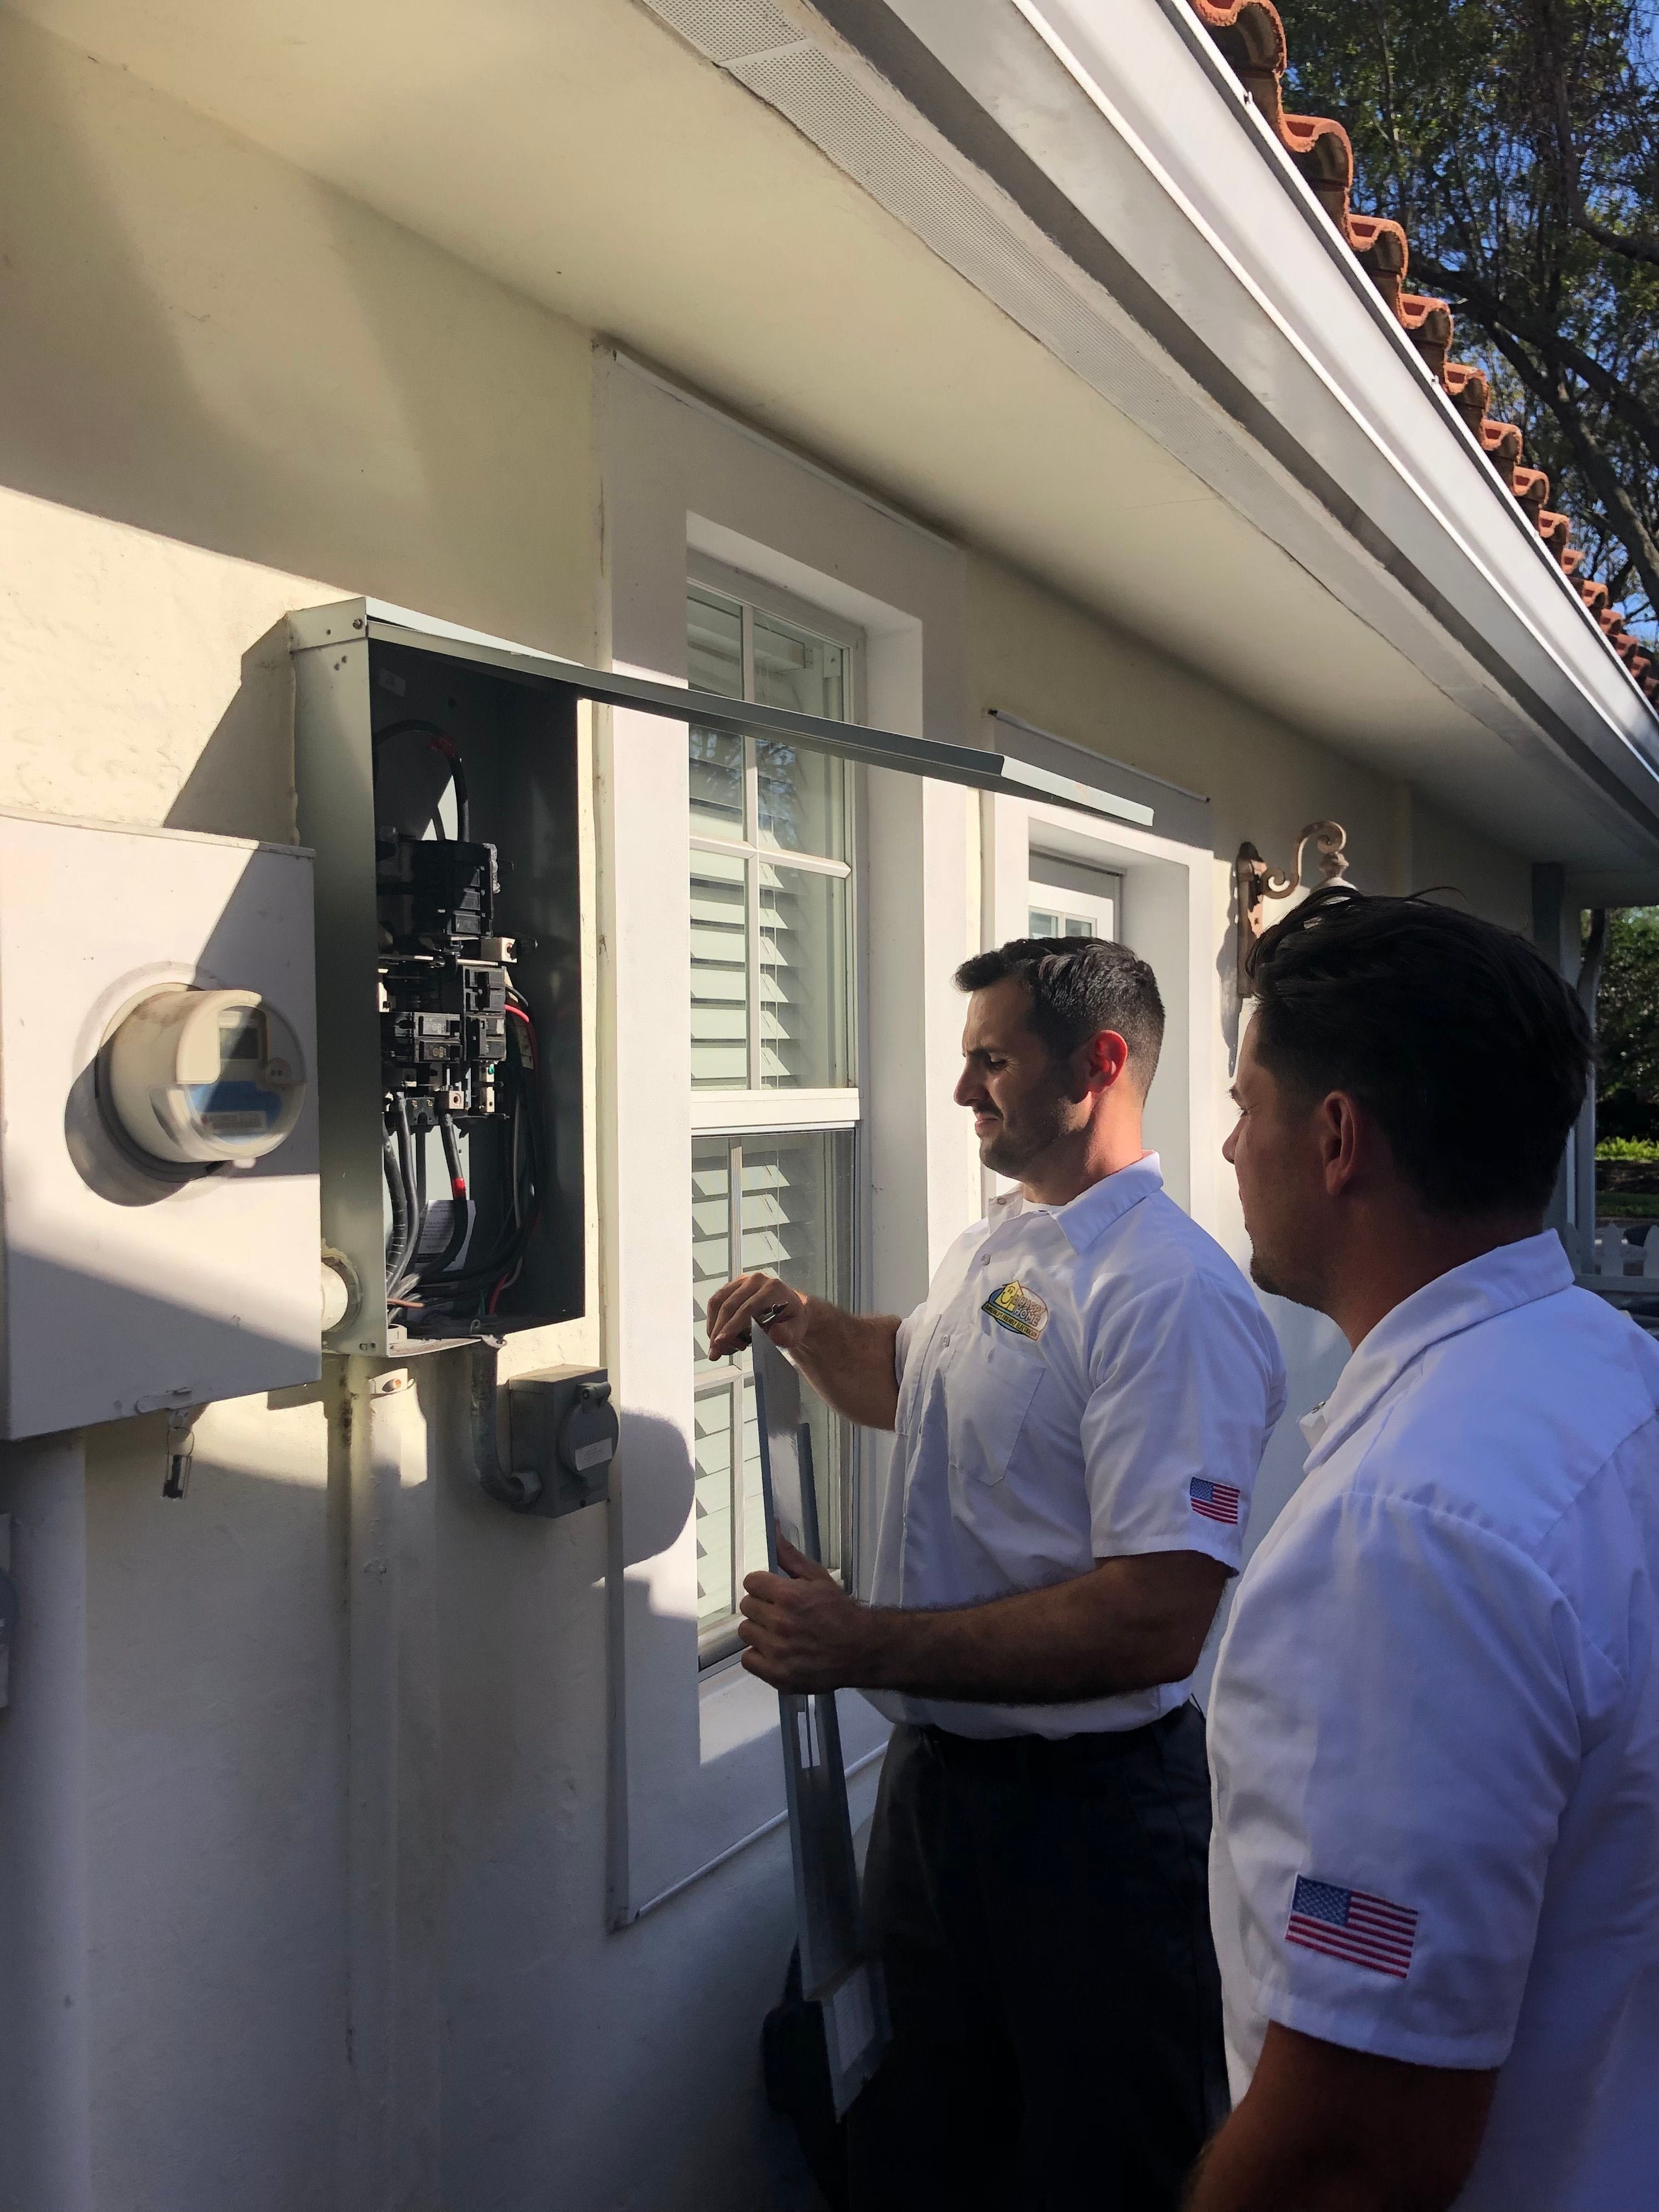 Best Electricians in West Palm Beach. Local electricians in West Palm Beach FL. Licensed electricians in West Palm Beach FL.